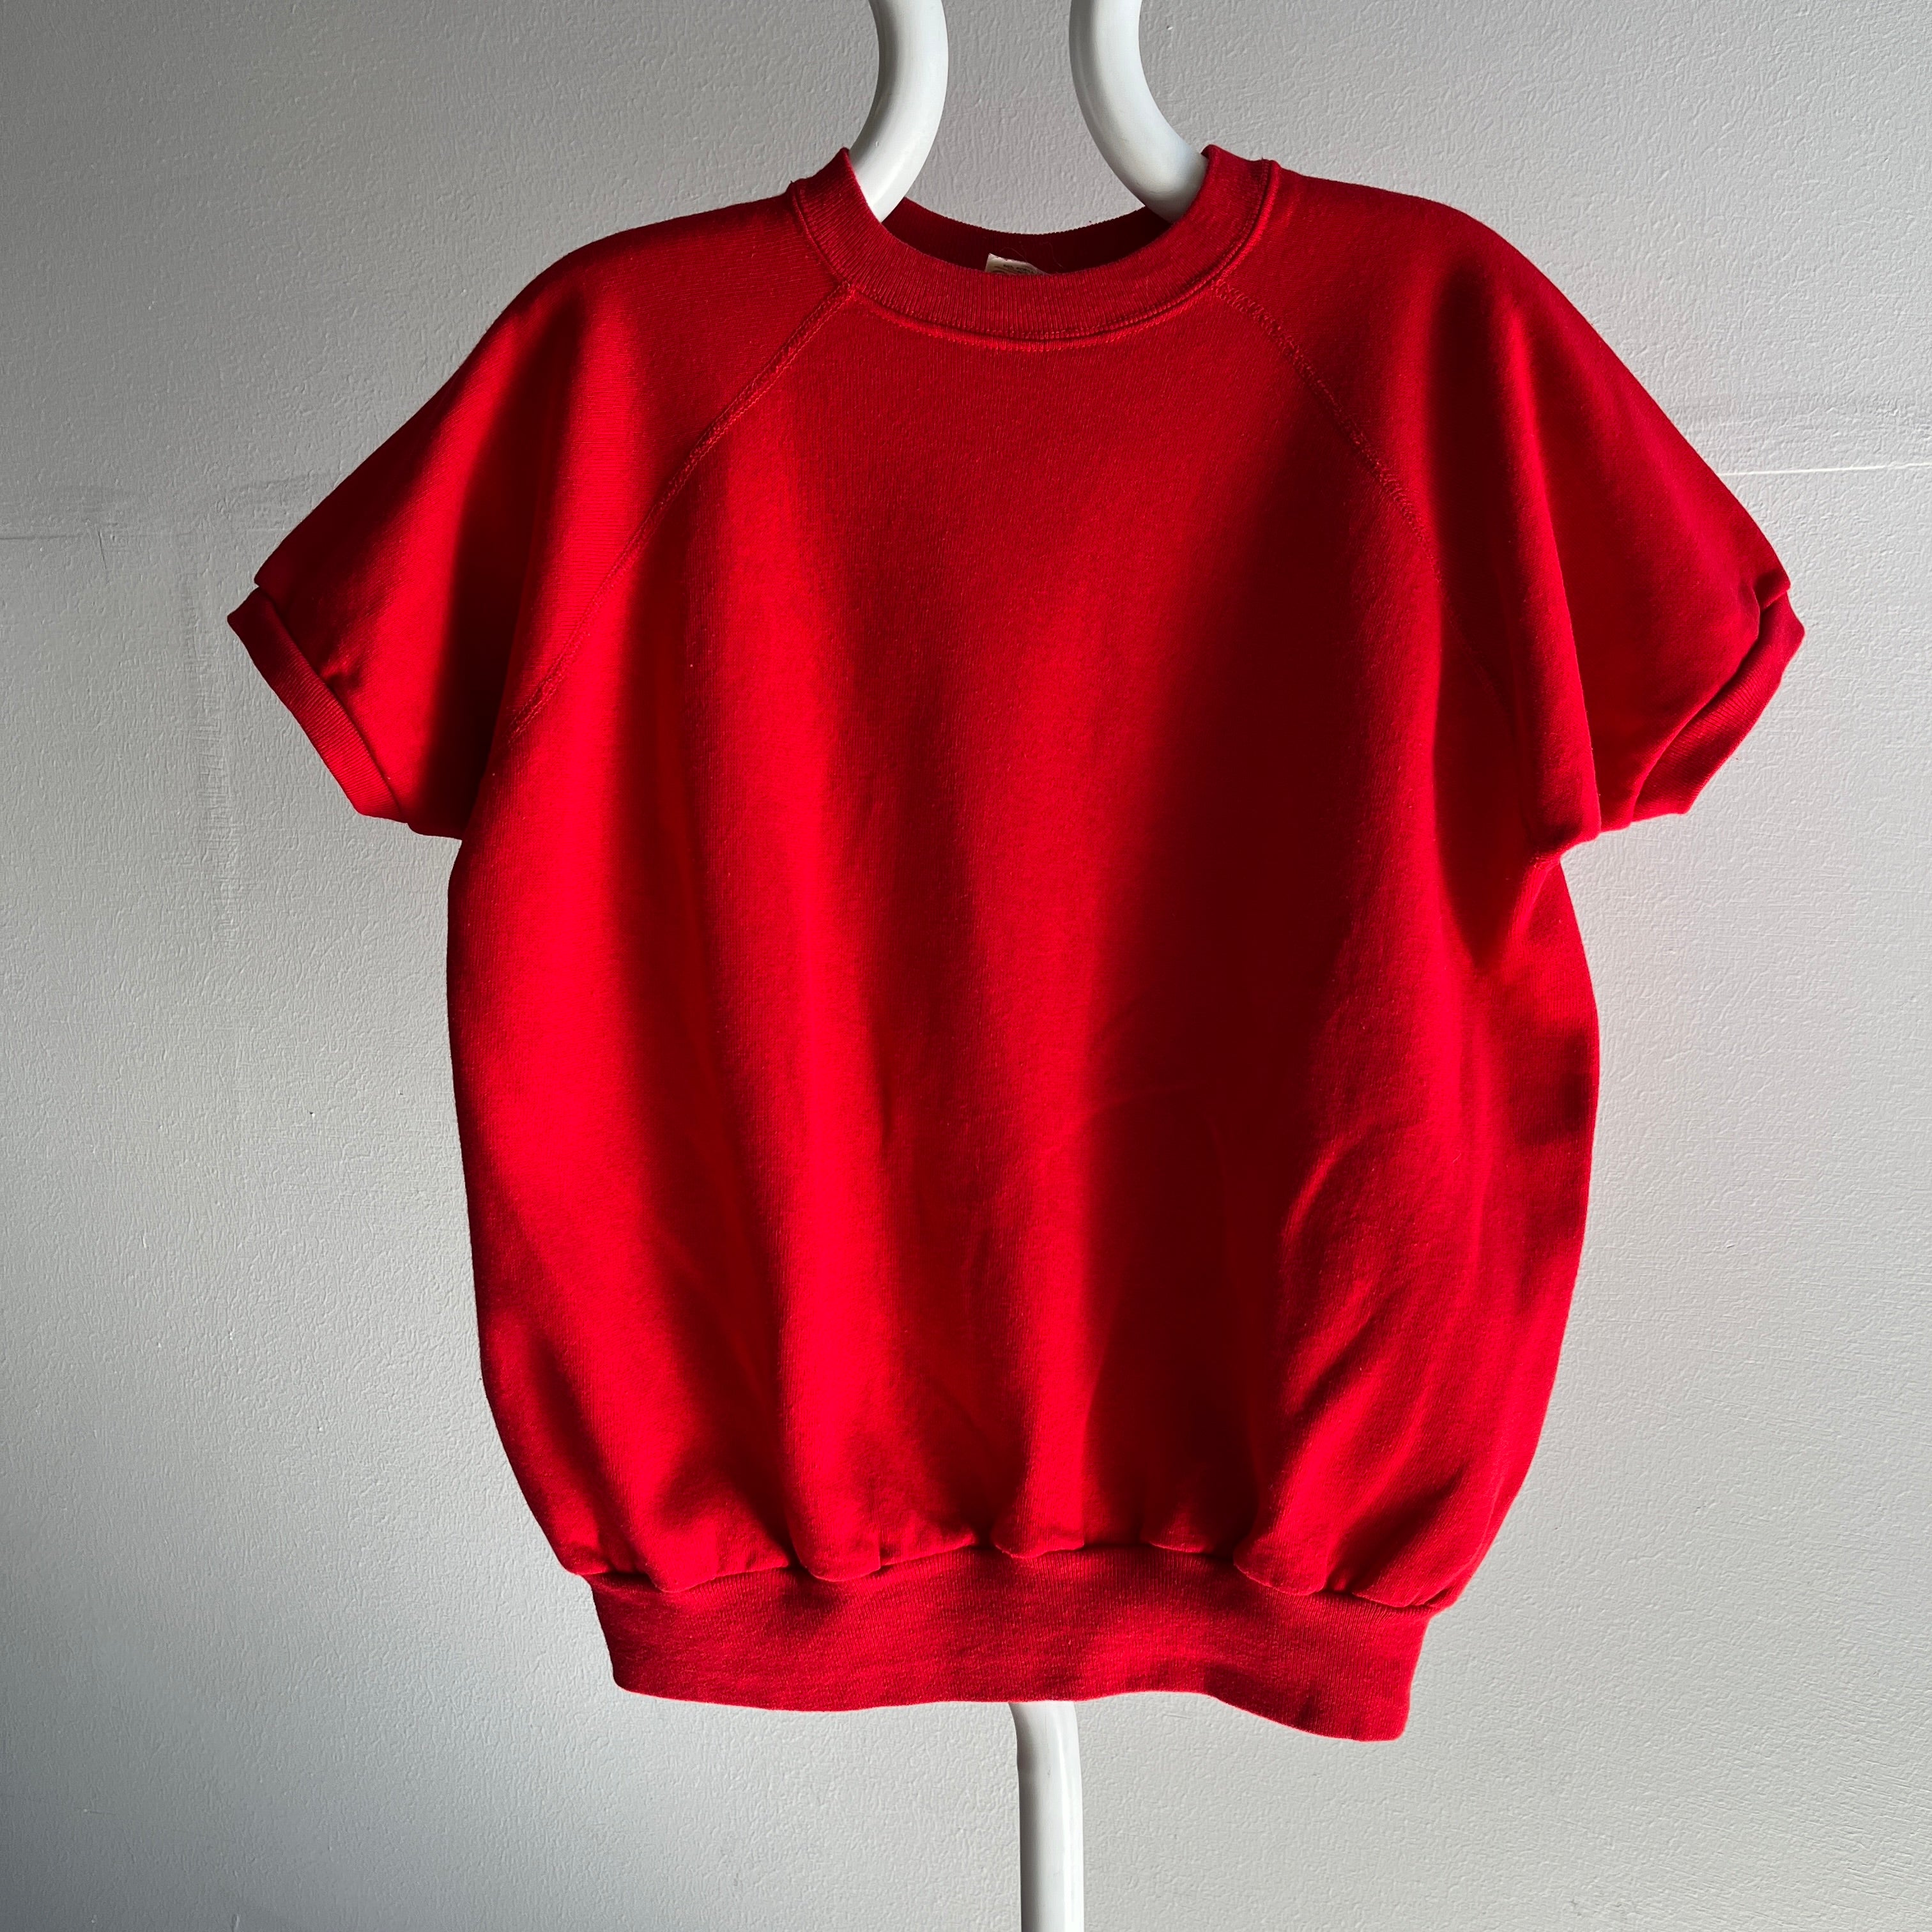 Années 1990 Soft Blank Red Warm Up By Action